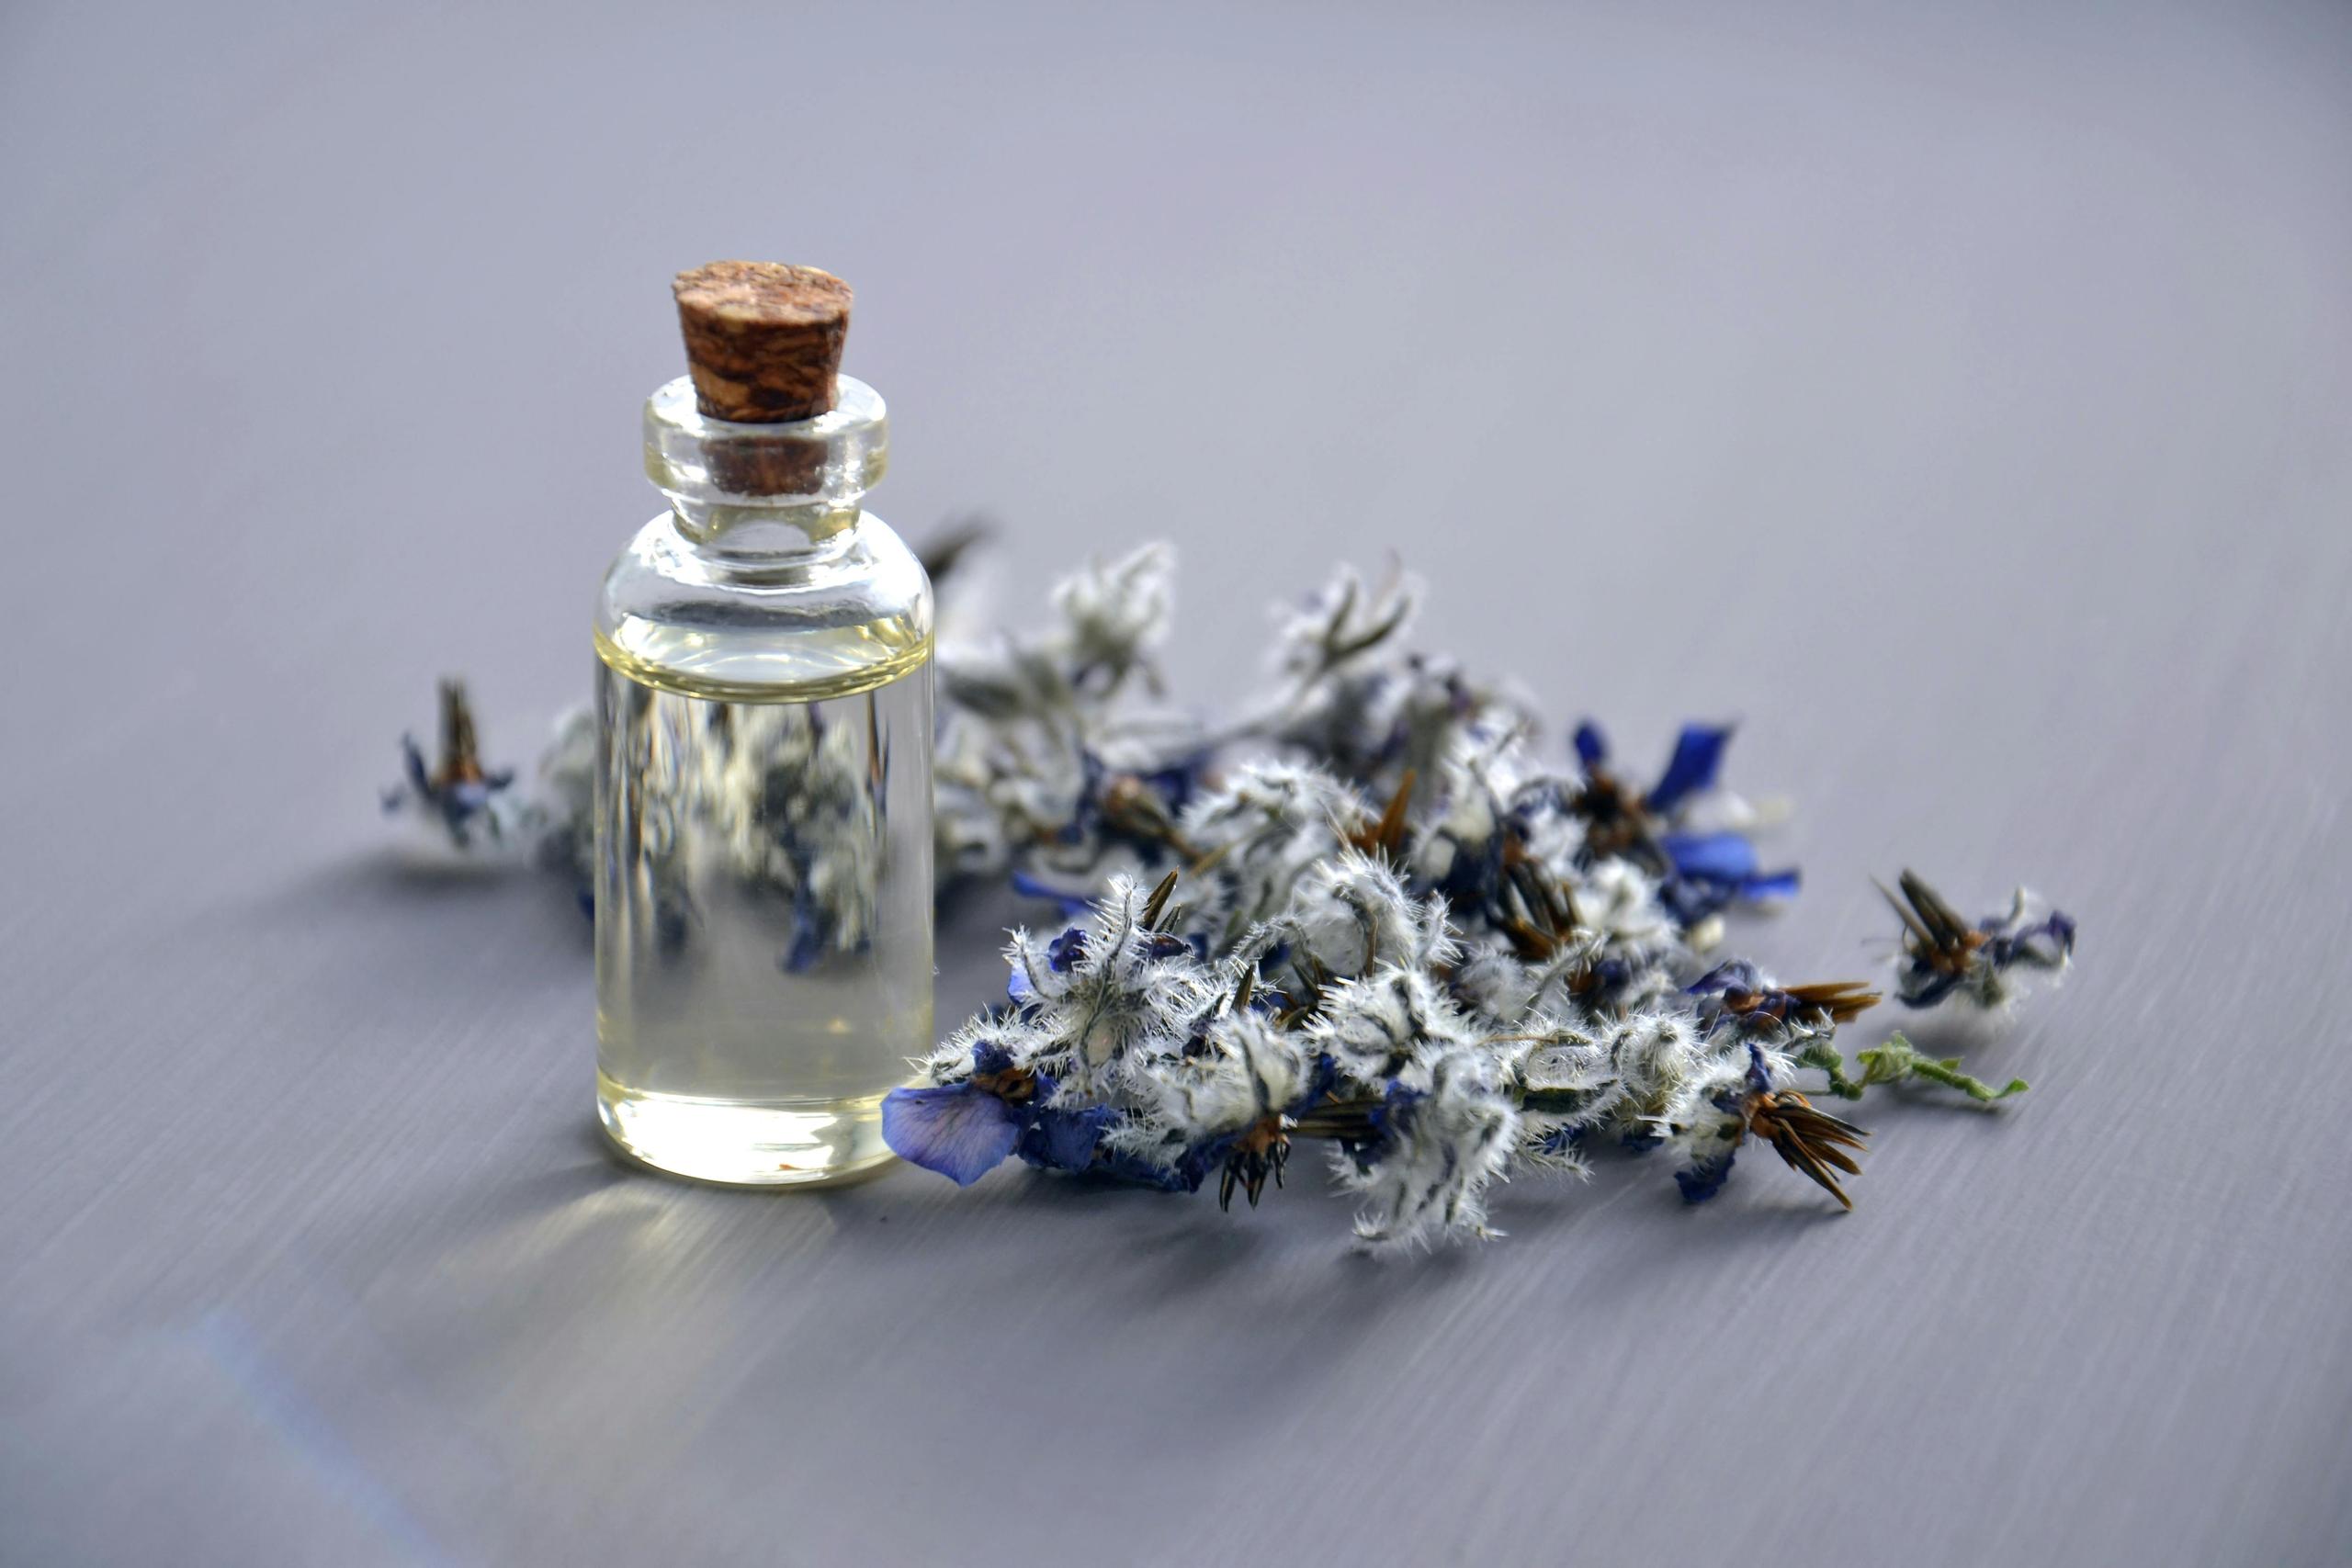 The importance of personal cleanliness and smelling good in Islamic tradition